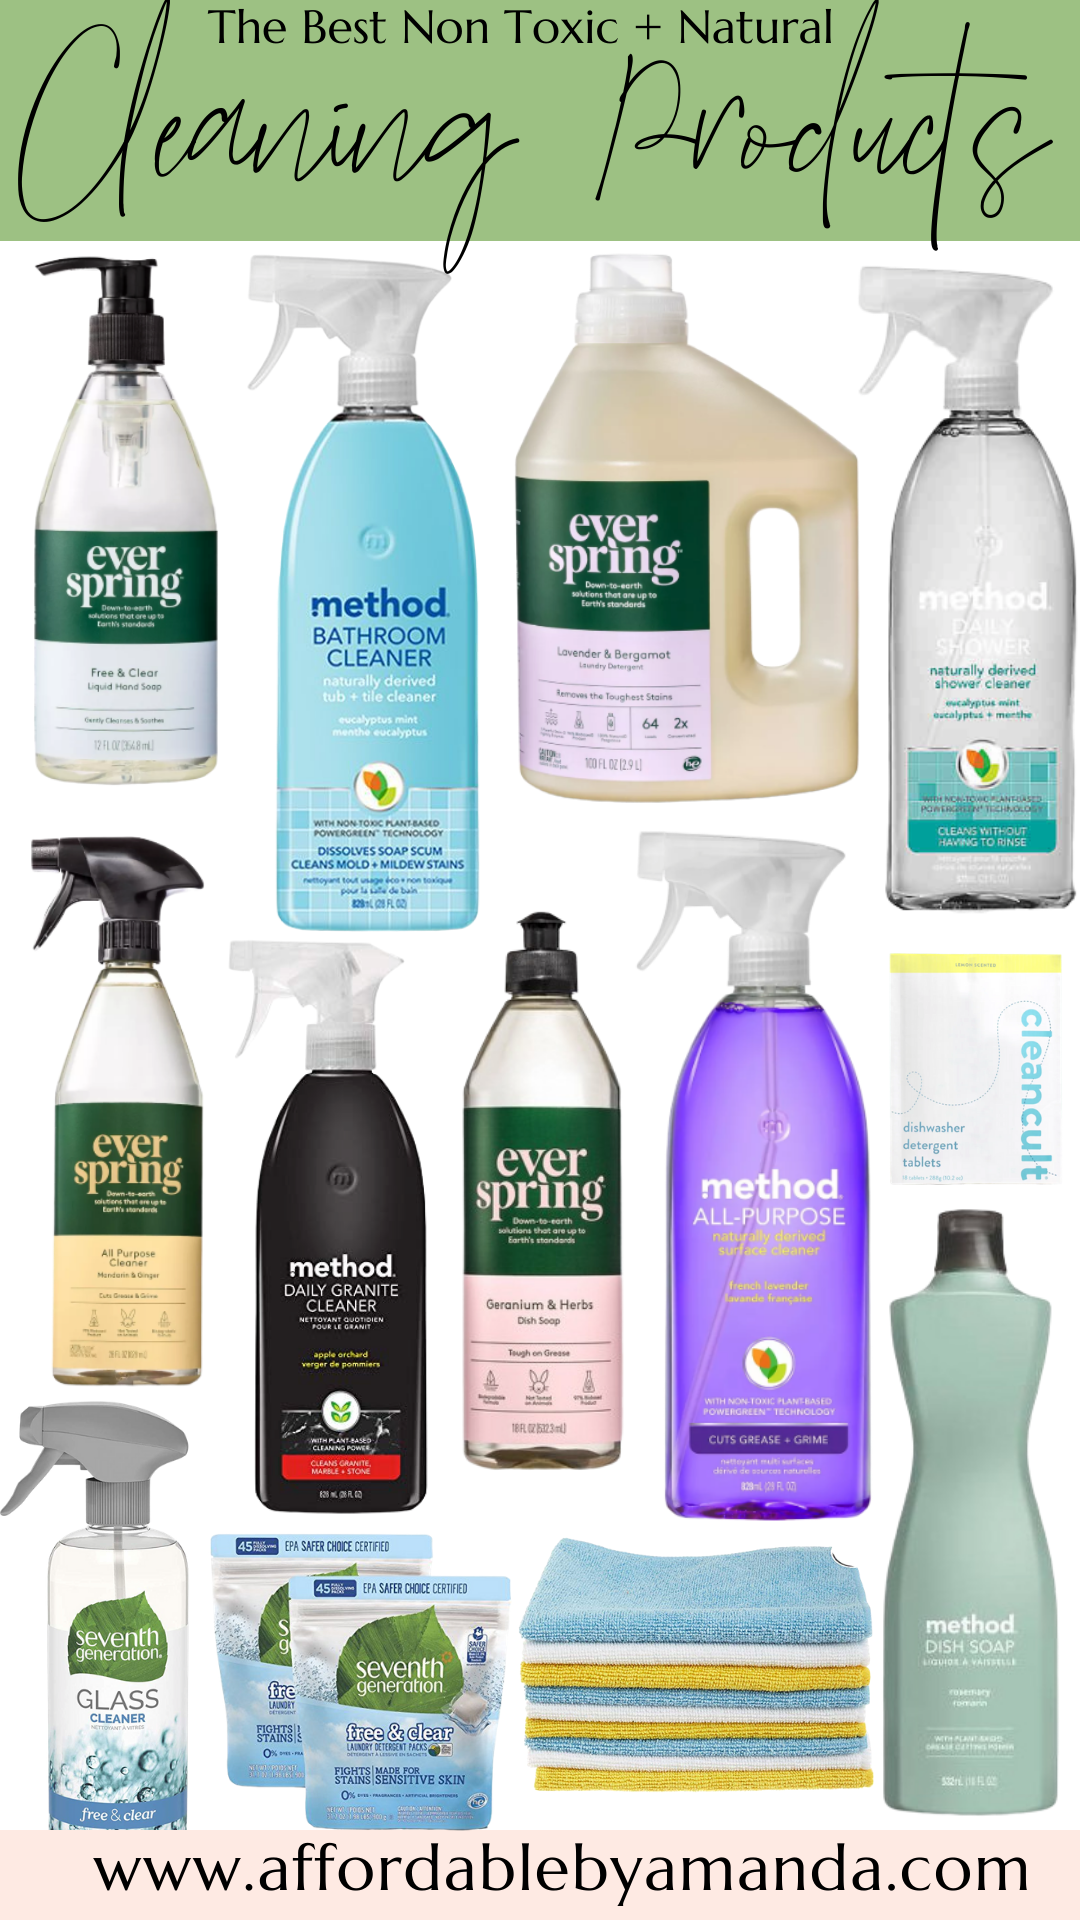 https://affordablebyamanda.com/wp-content/uploads/2020/03/best-non-toxic-natural-cleaning-products-household-products.png